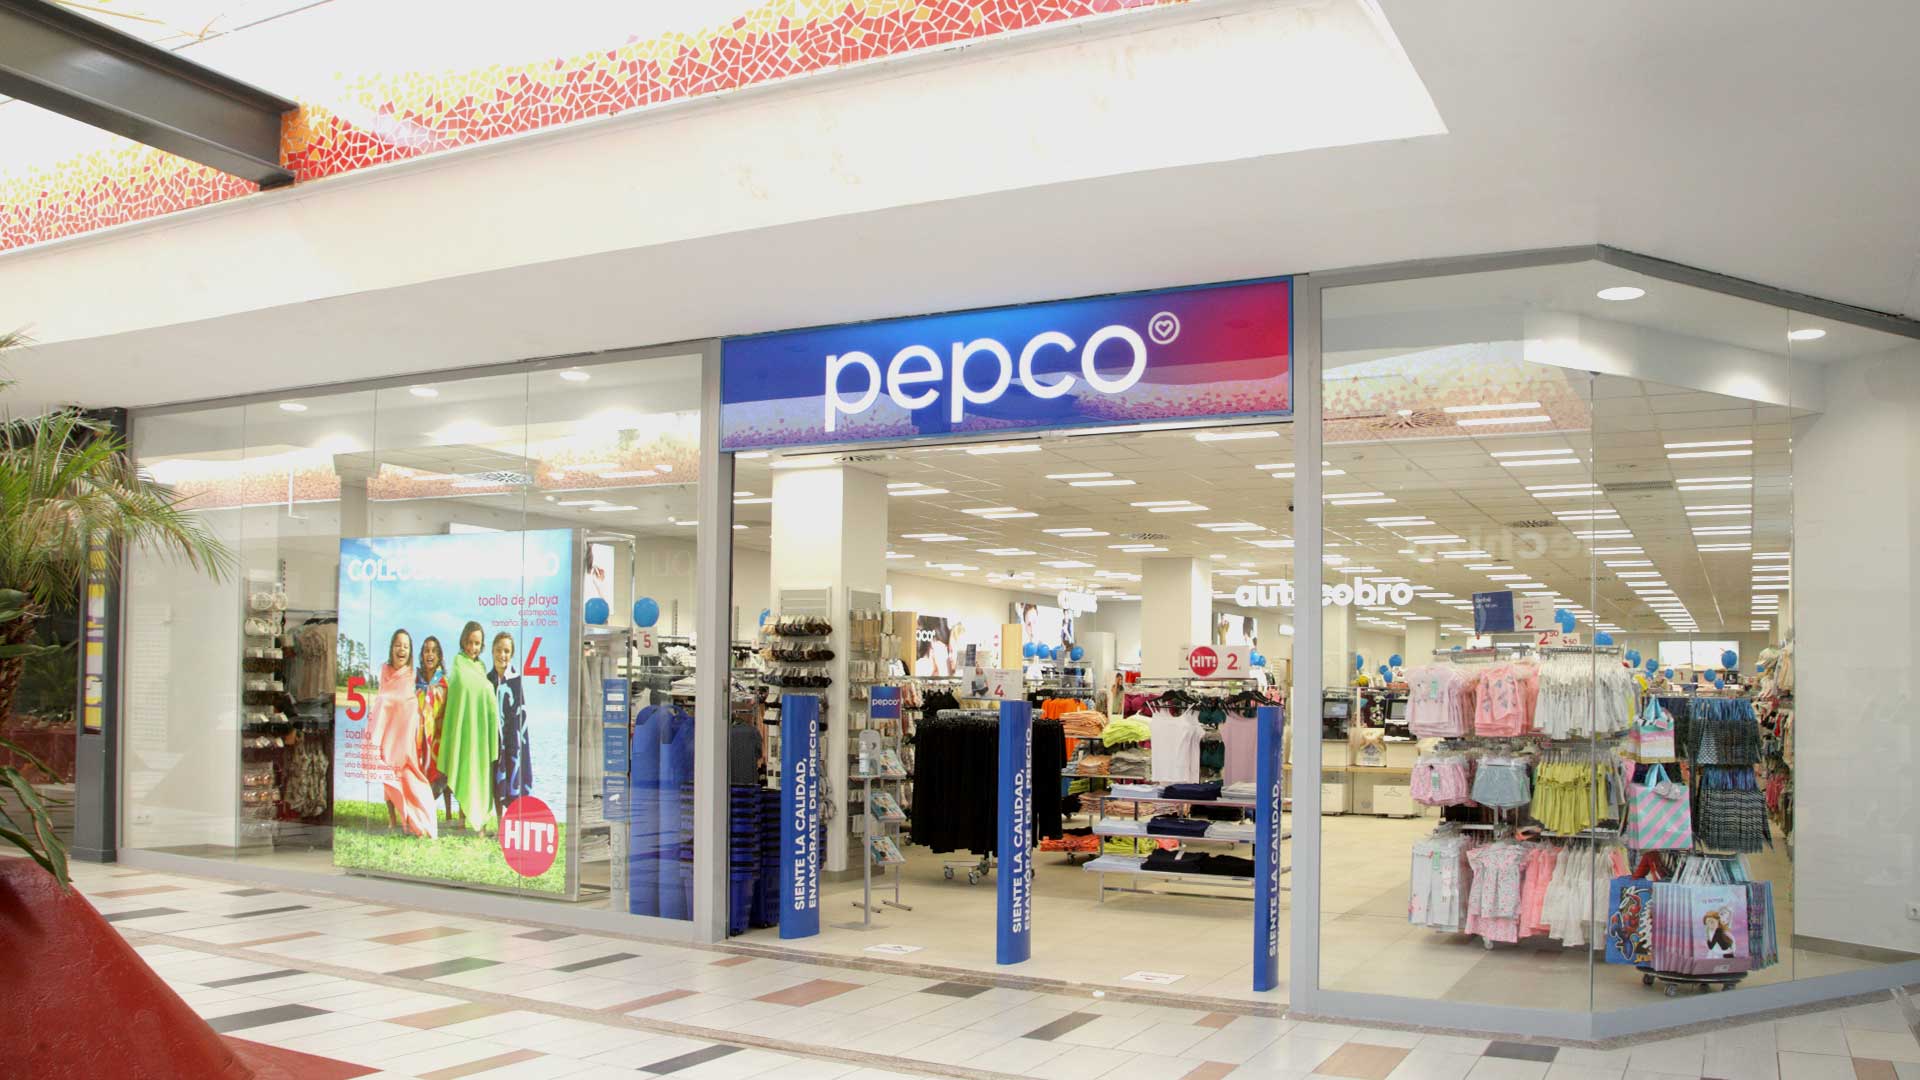 Construction of retail premises for Pepco in Spain